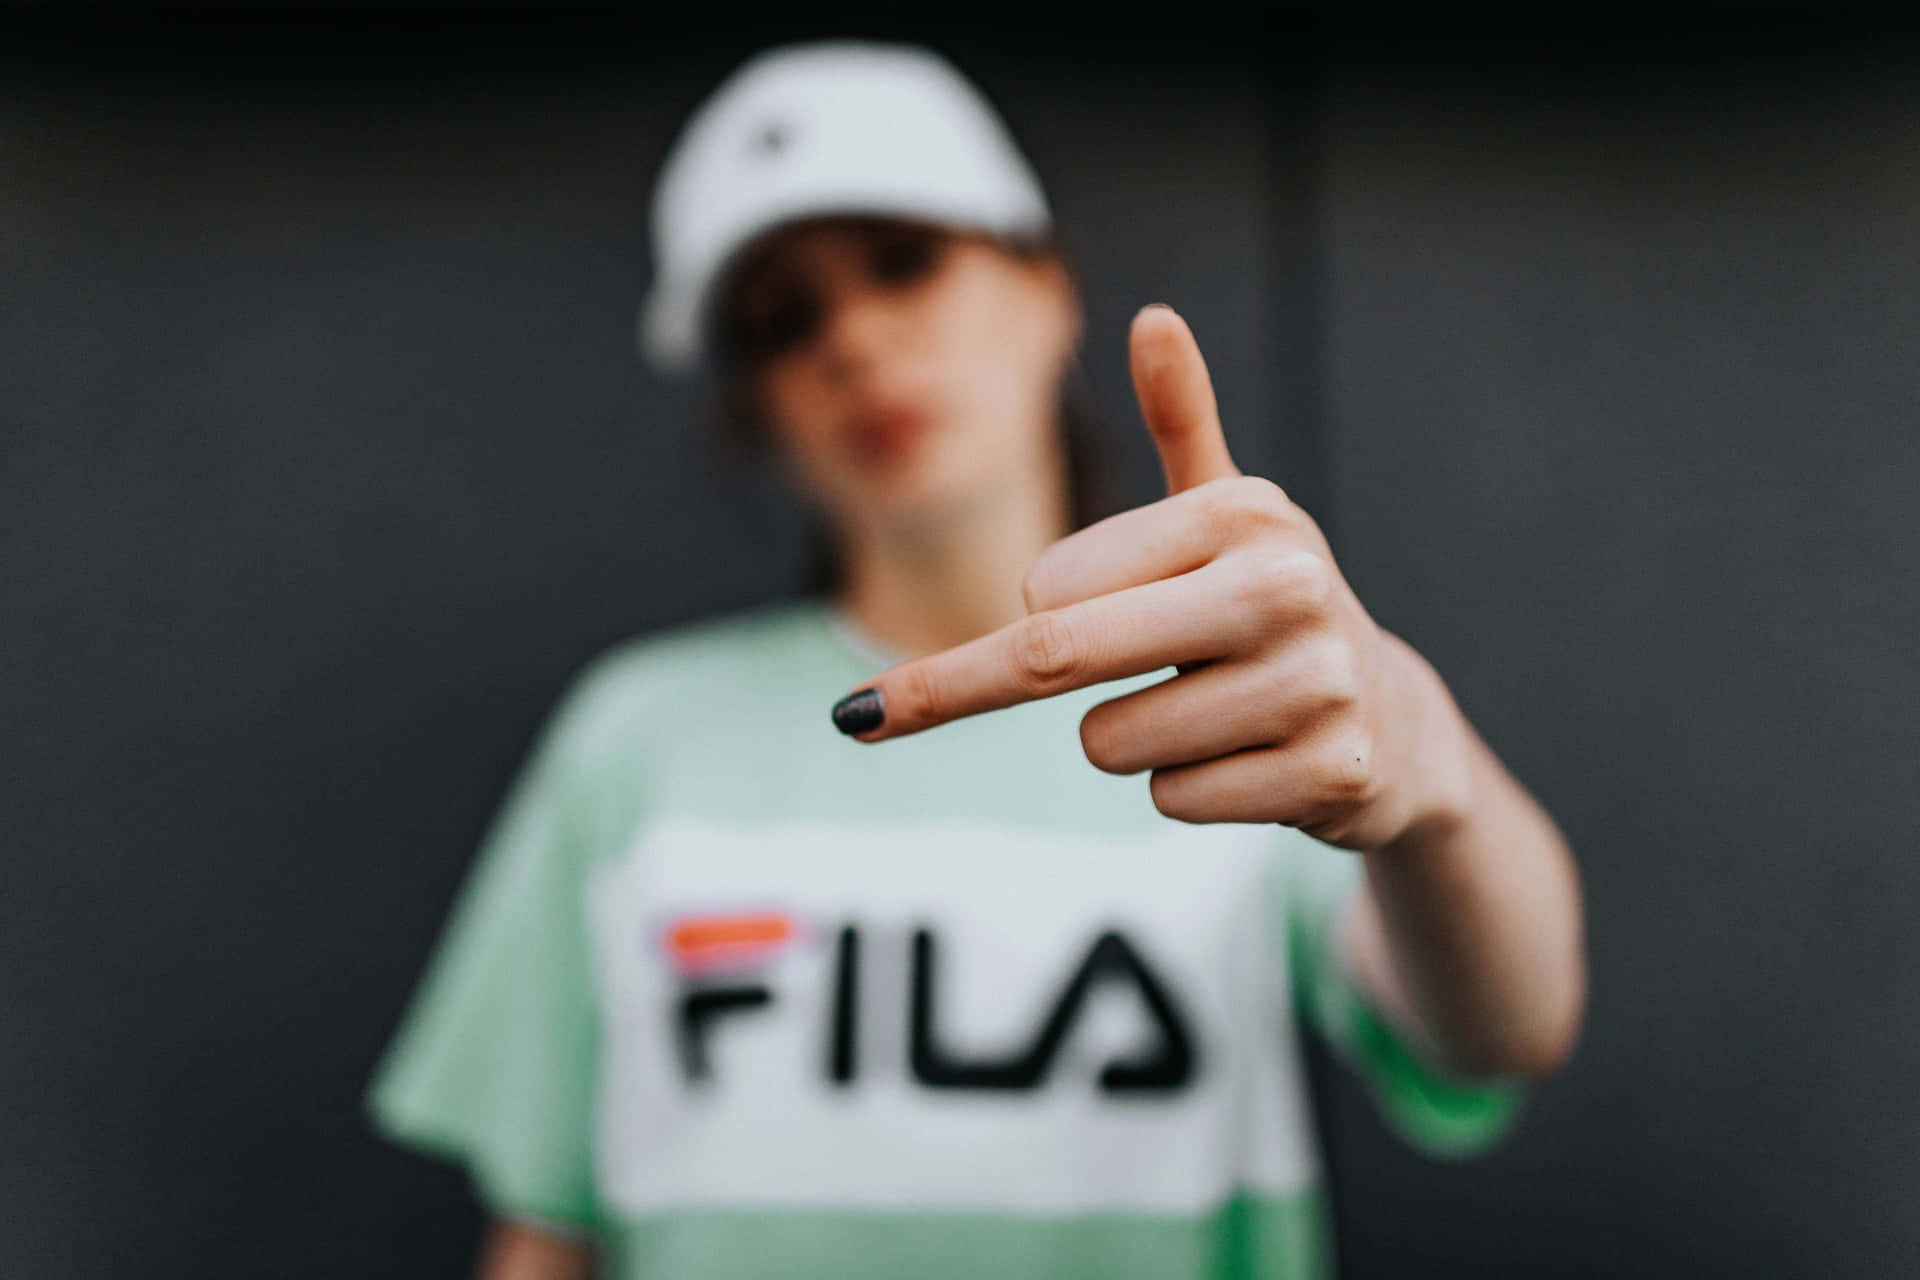 Fila T-shirt - A Woman Showing The Thumbs Up Background